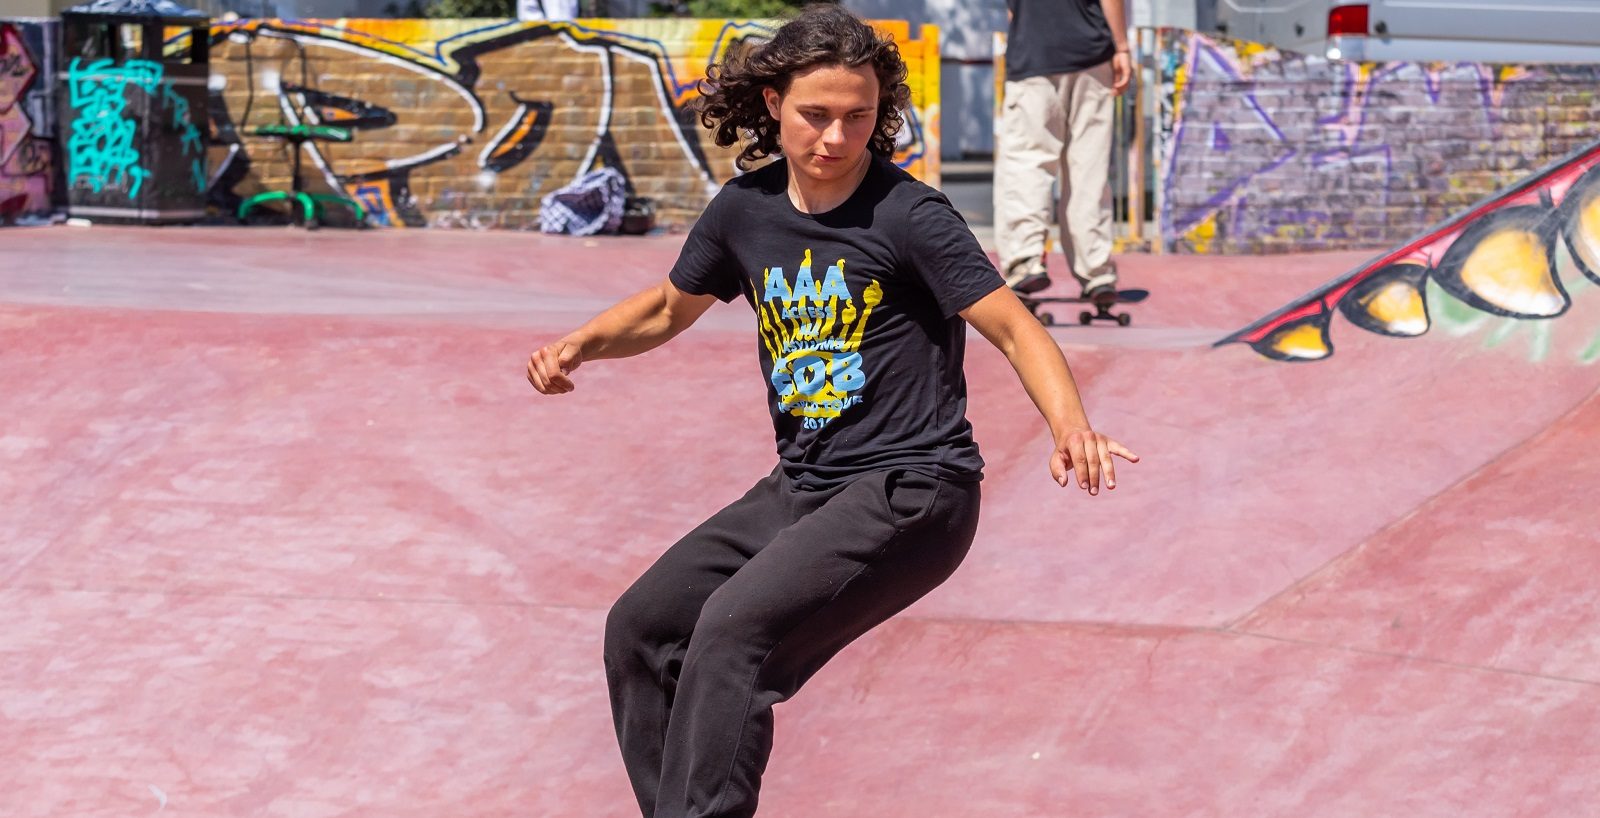 skateboarder with long hair, black t-shirt, jeans